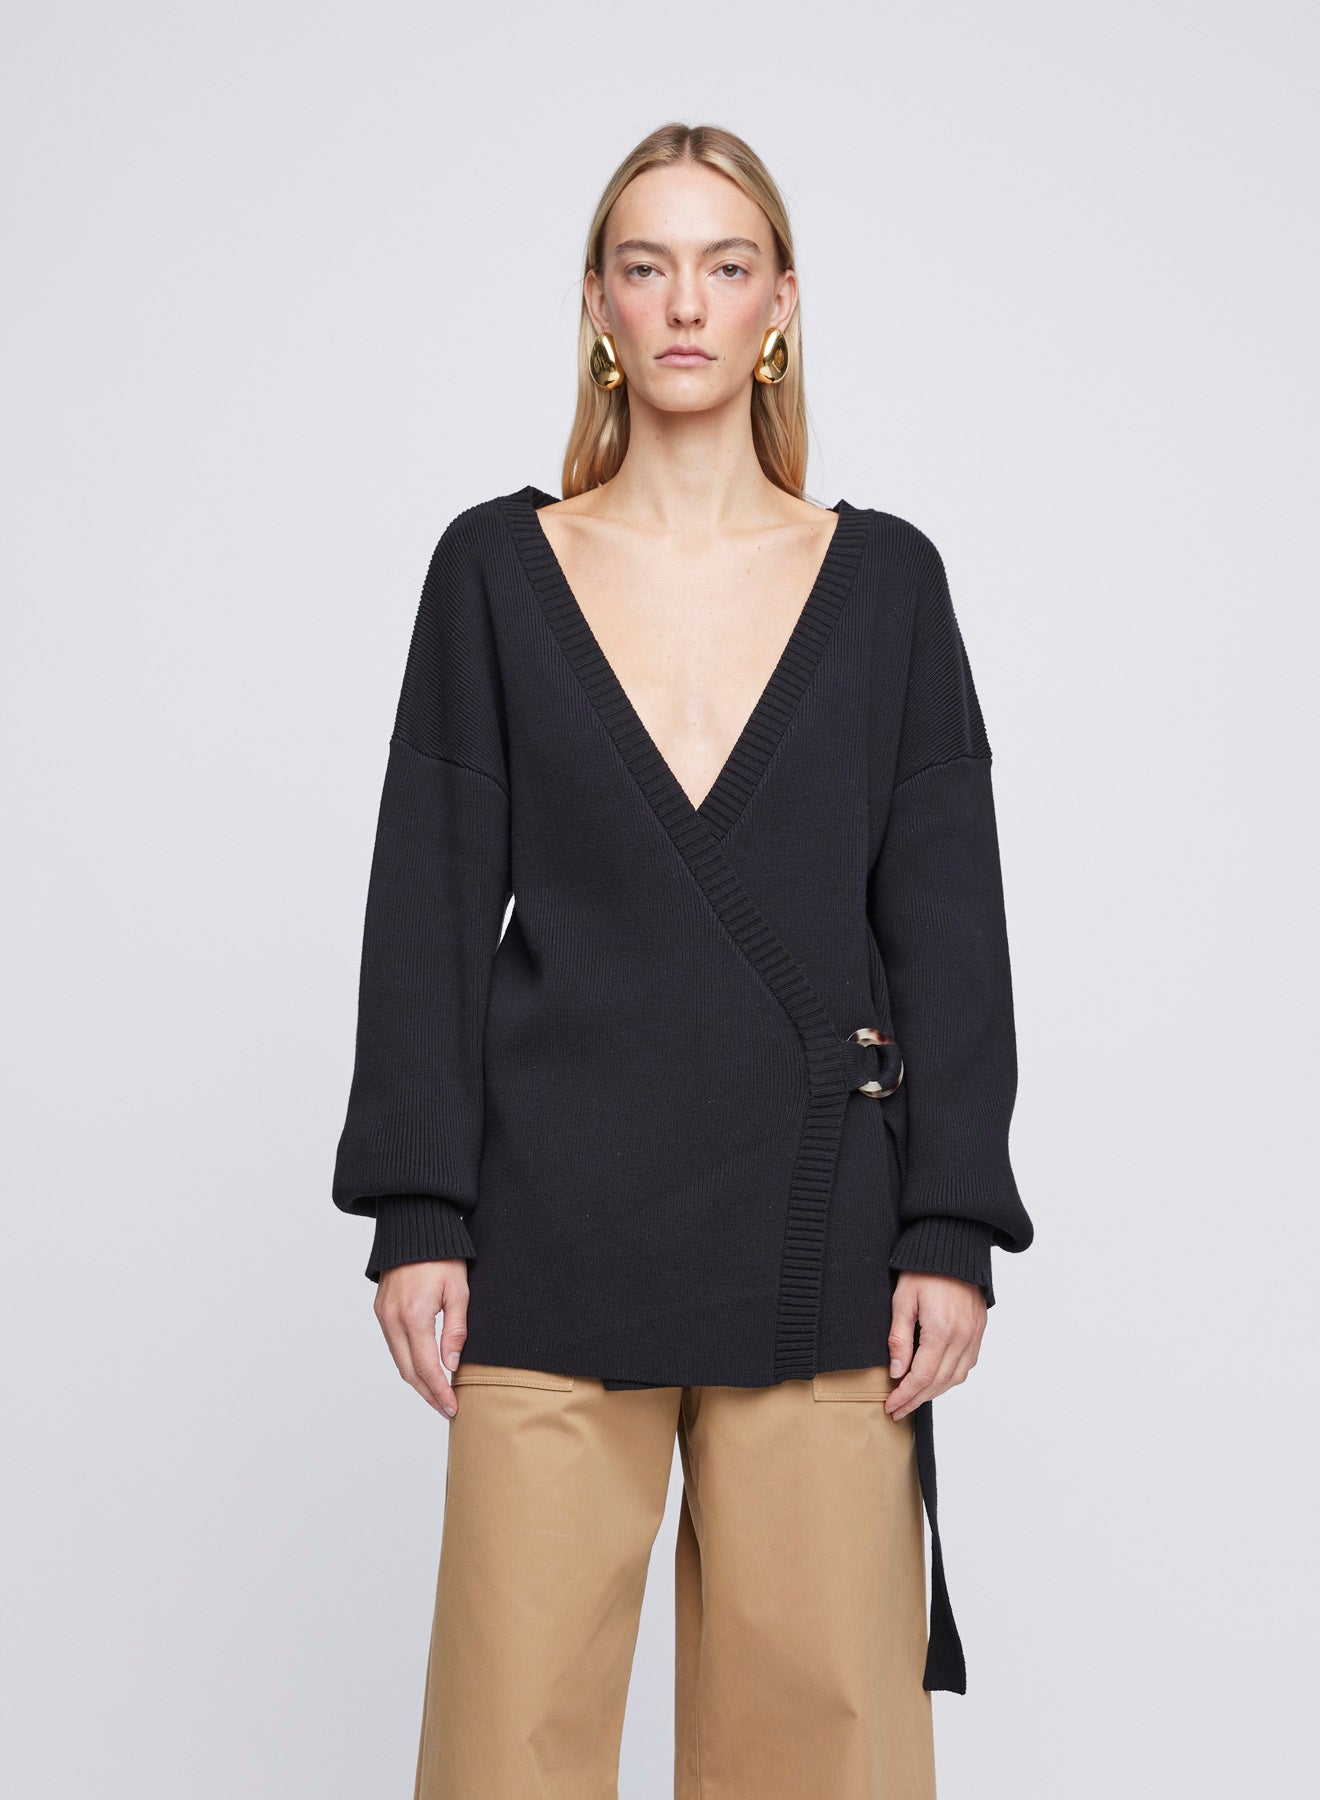 The Anna Quan Bridget Cardigan in Silence is a classic long sleeve knitted cardigan with a belt closure and deep v cut neckline.